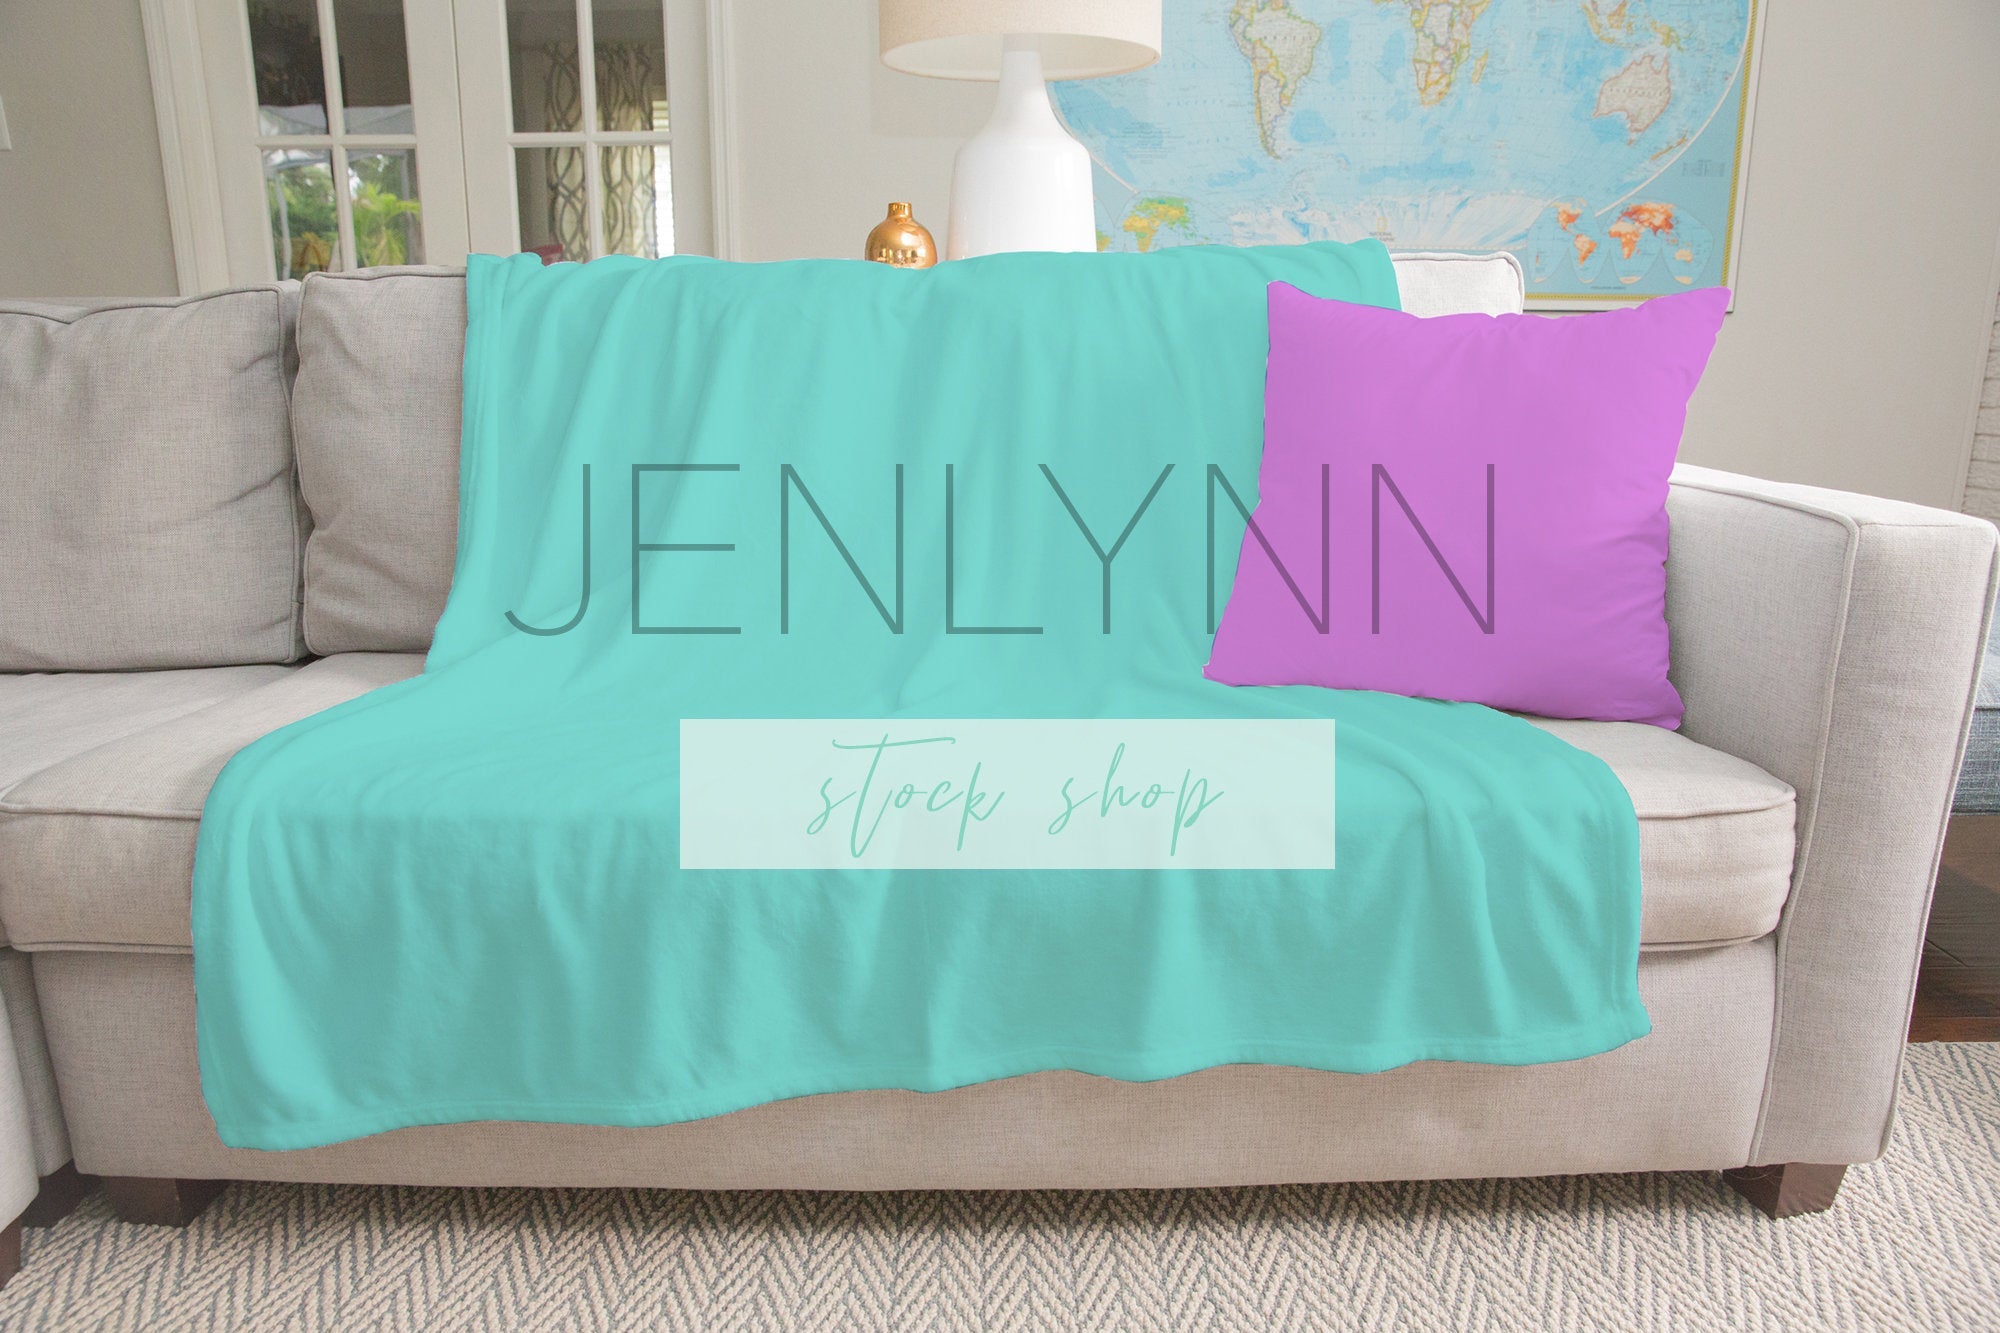 Minky Blanket and Pillow on Couch Mockup #2